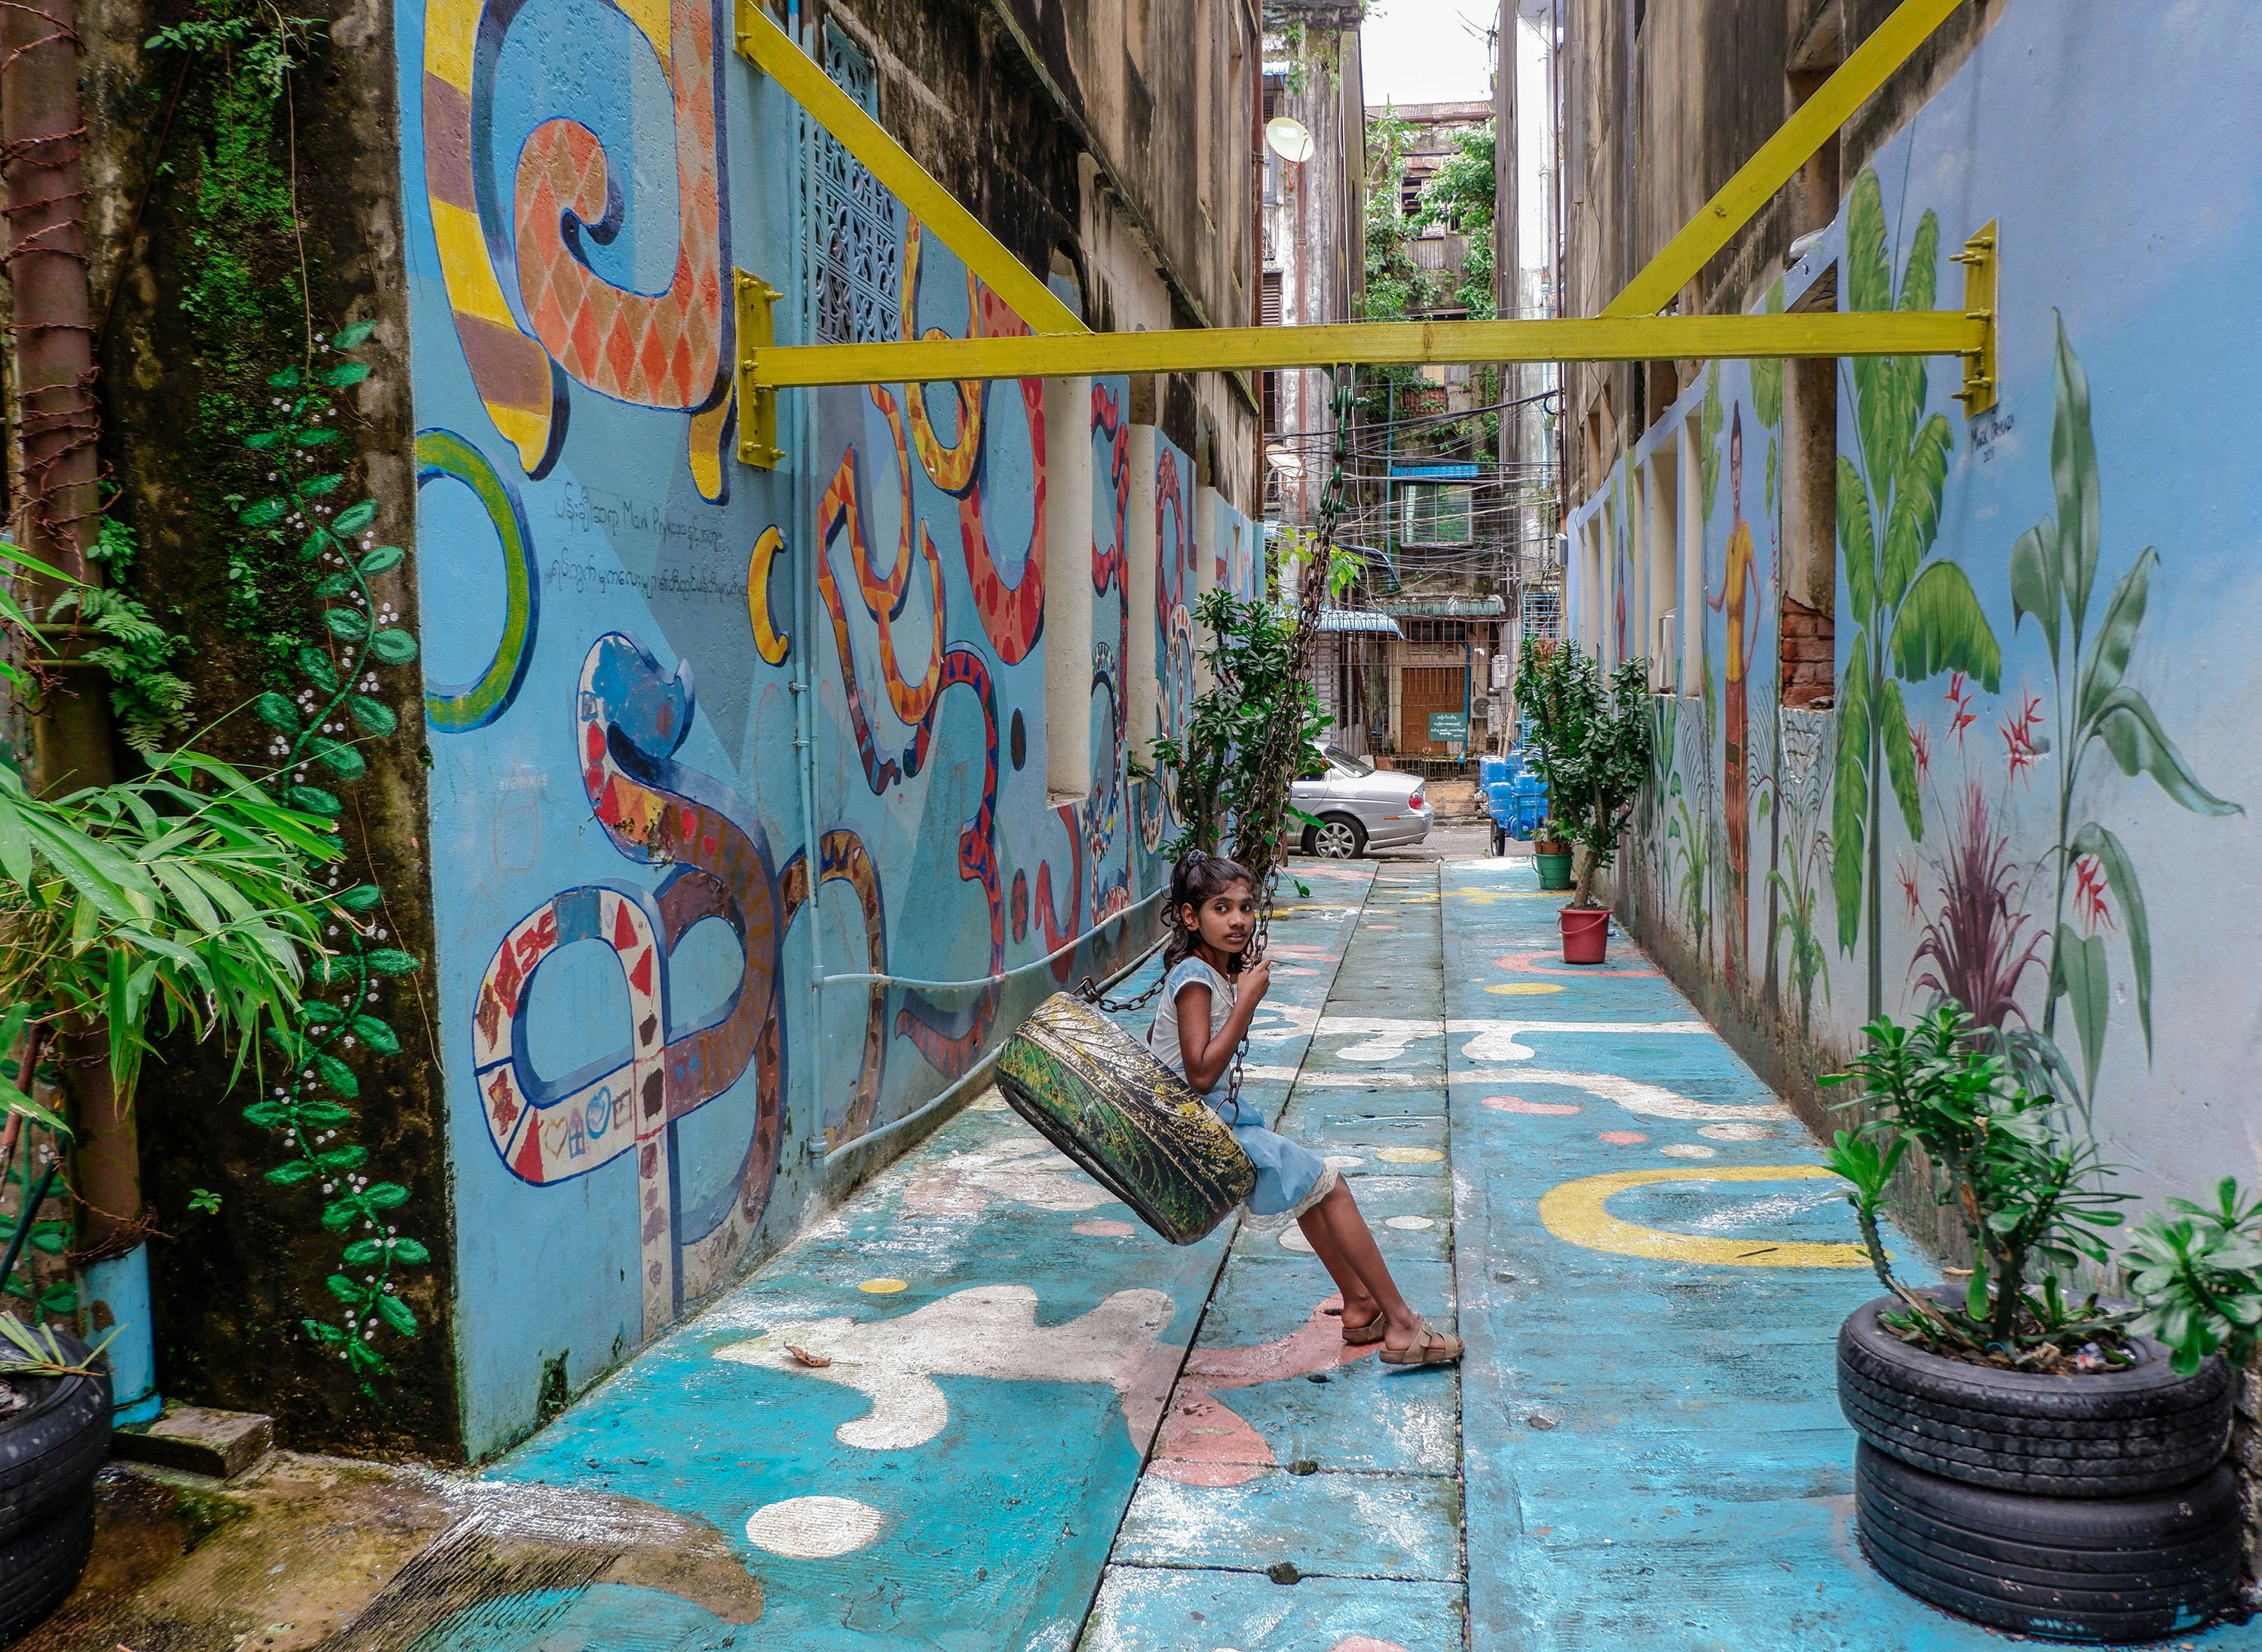 Girl plays on a swing in one of the cleaned up alleyways